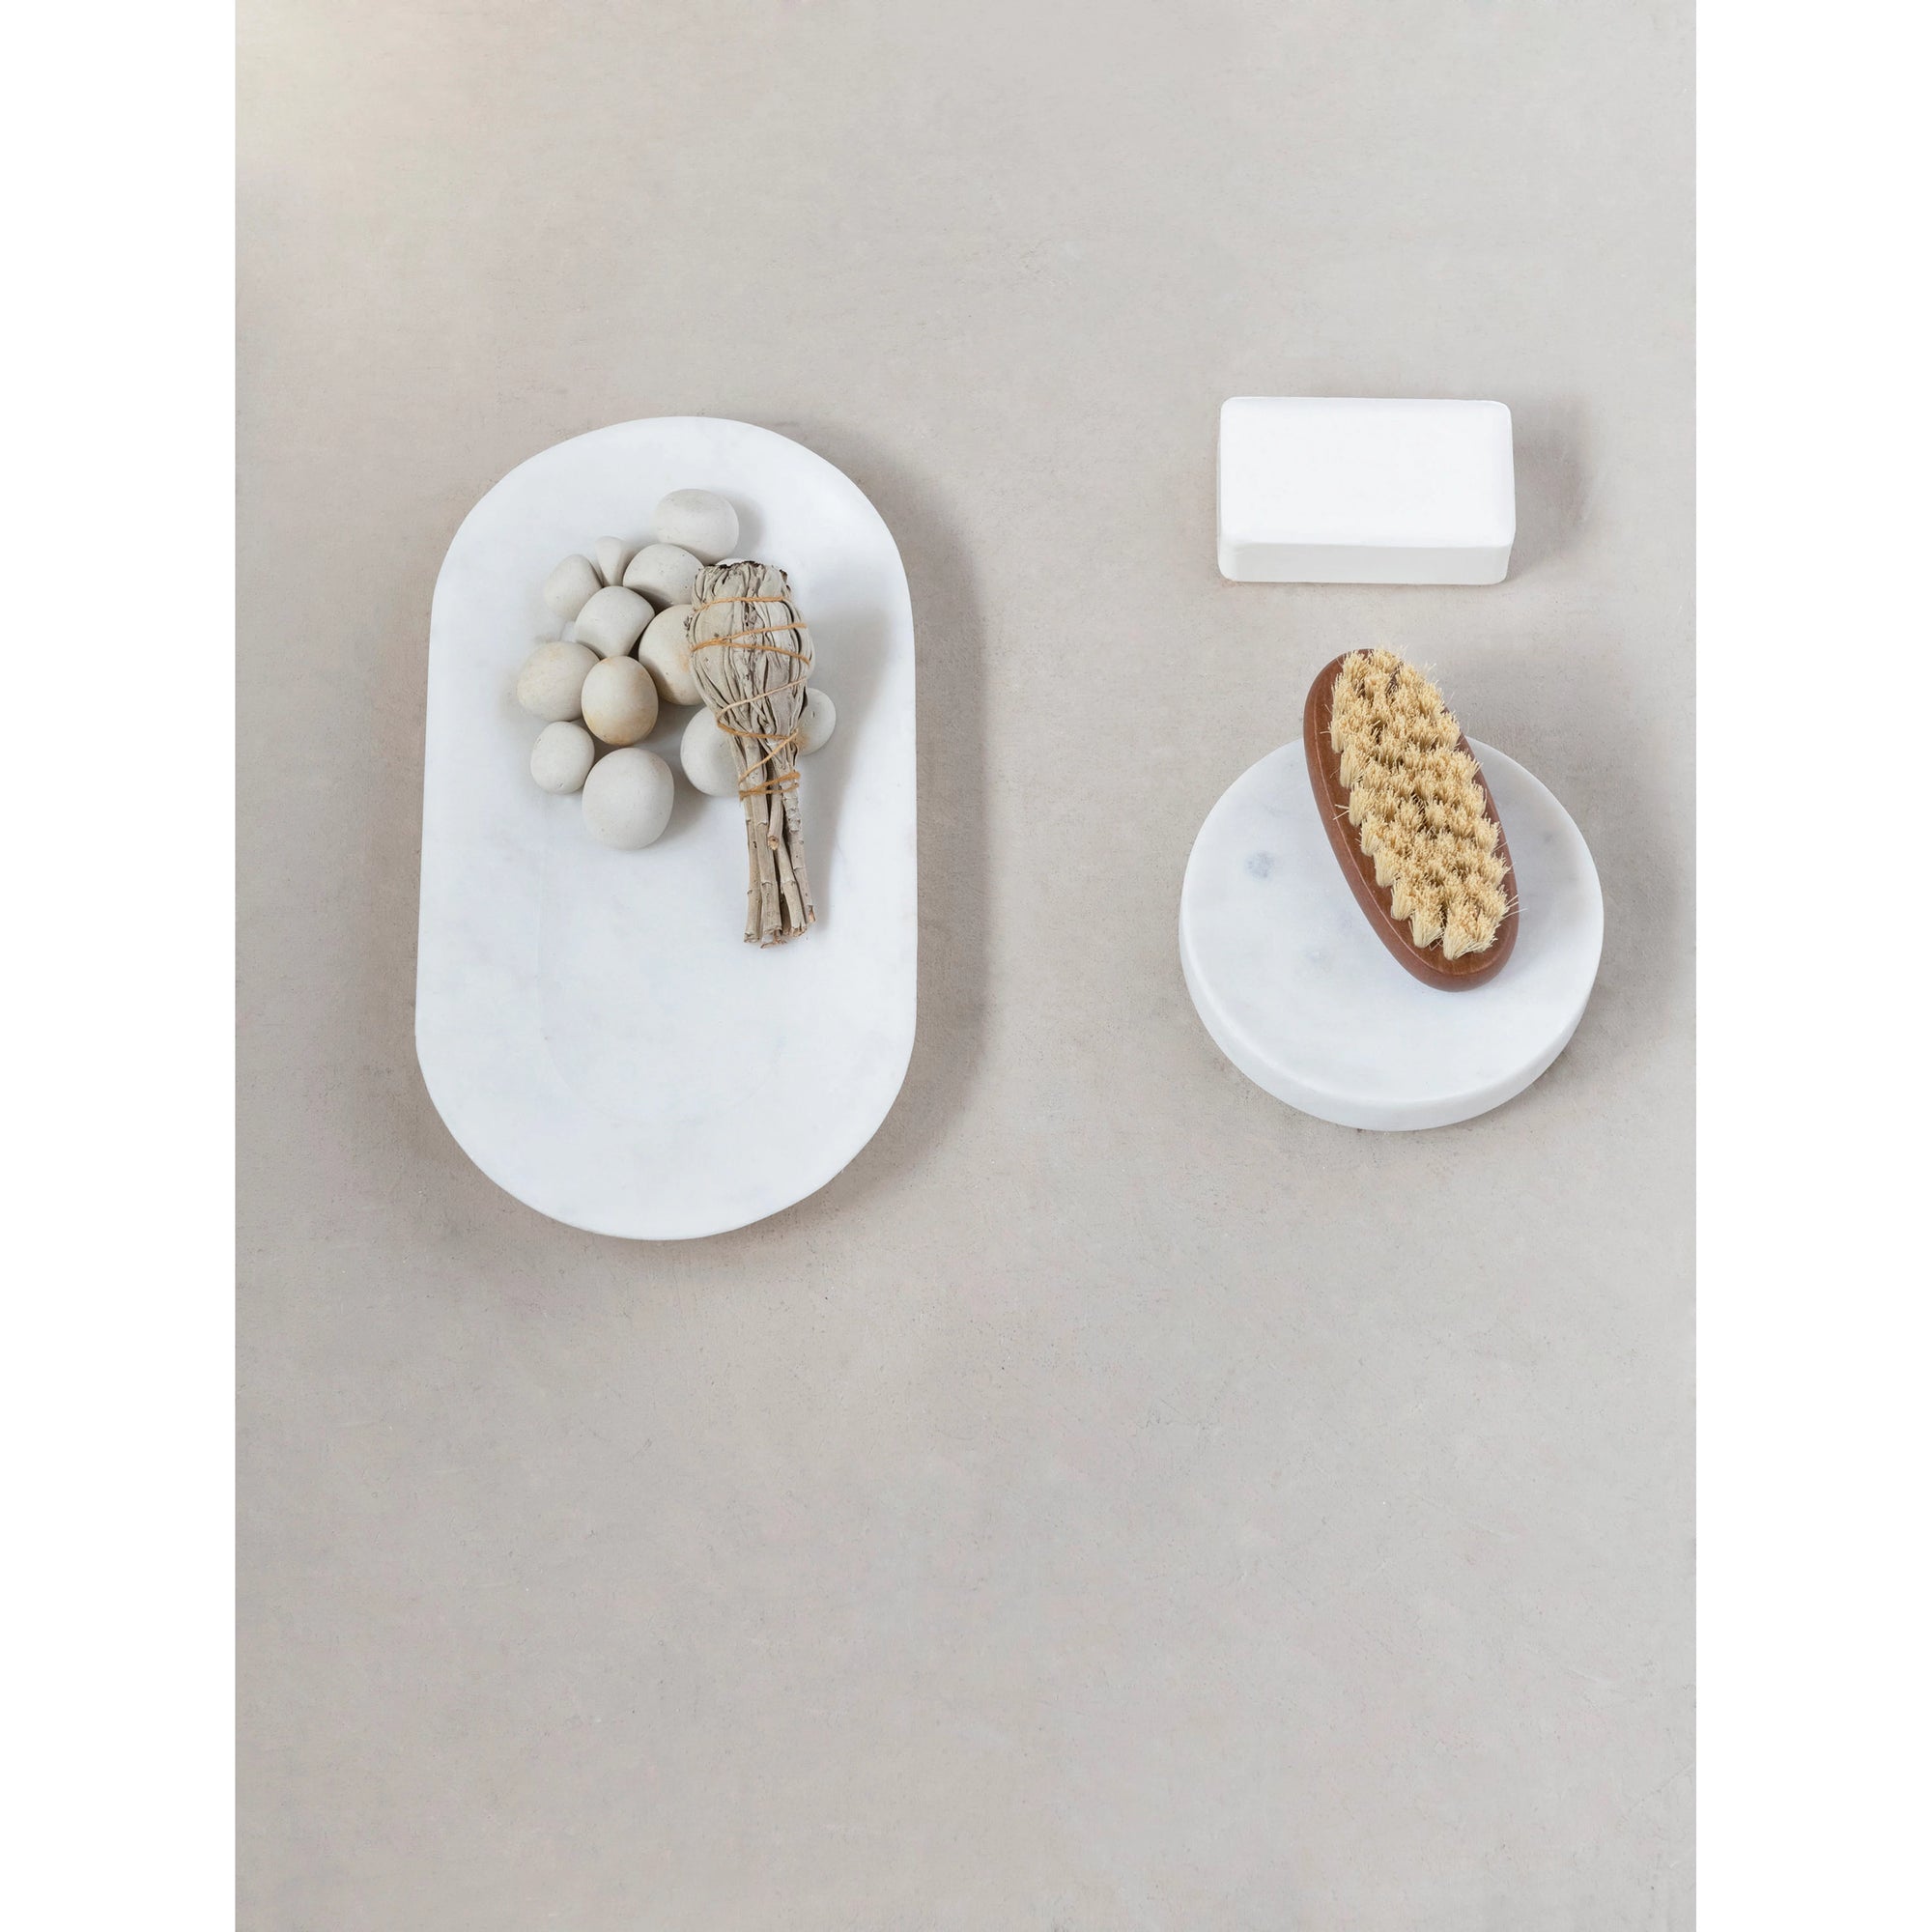 oval white marble tray. Perfect for displaying trinkets, matches, keys, and other items of home decor. #homedecor